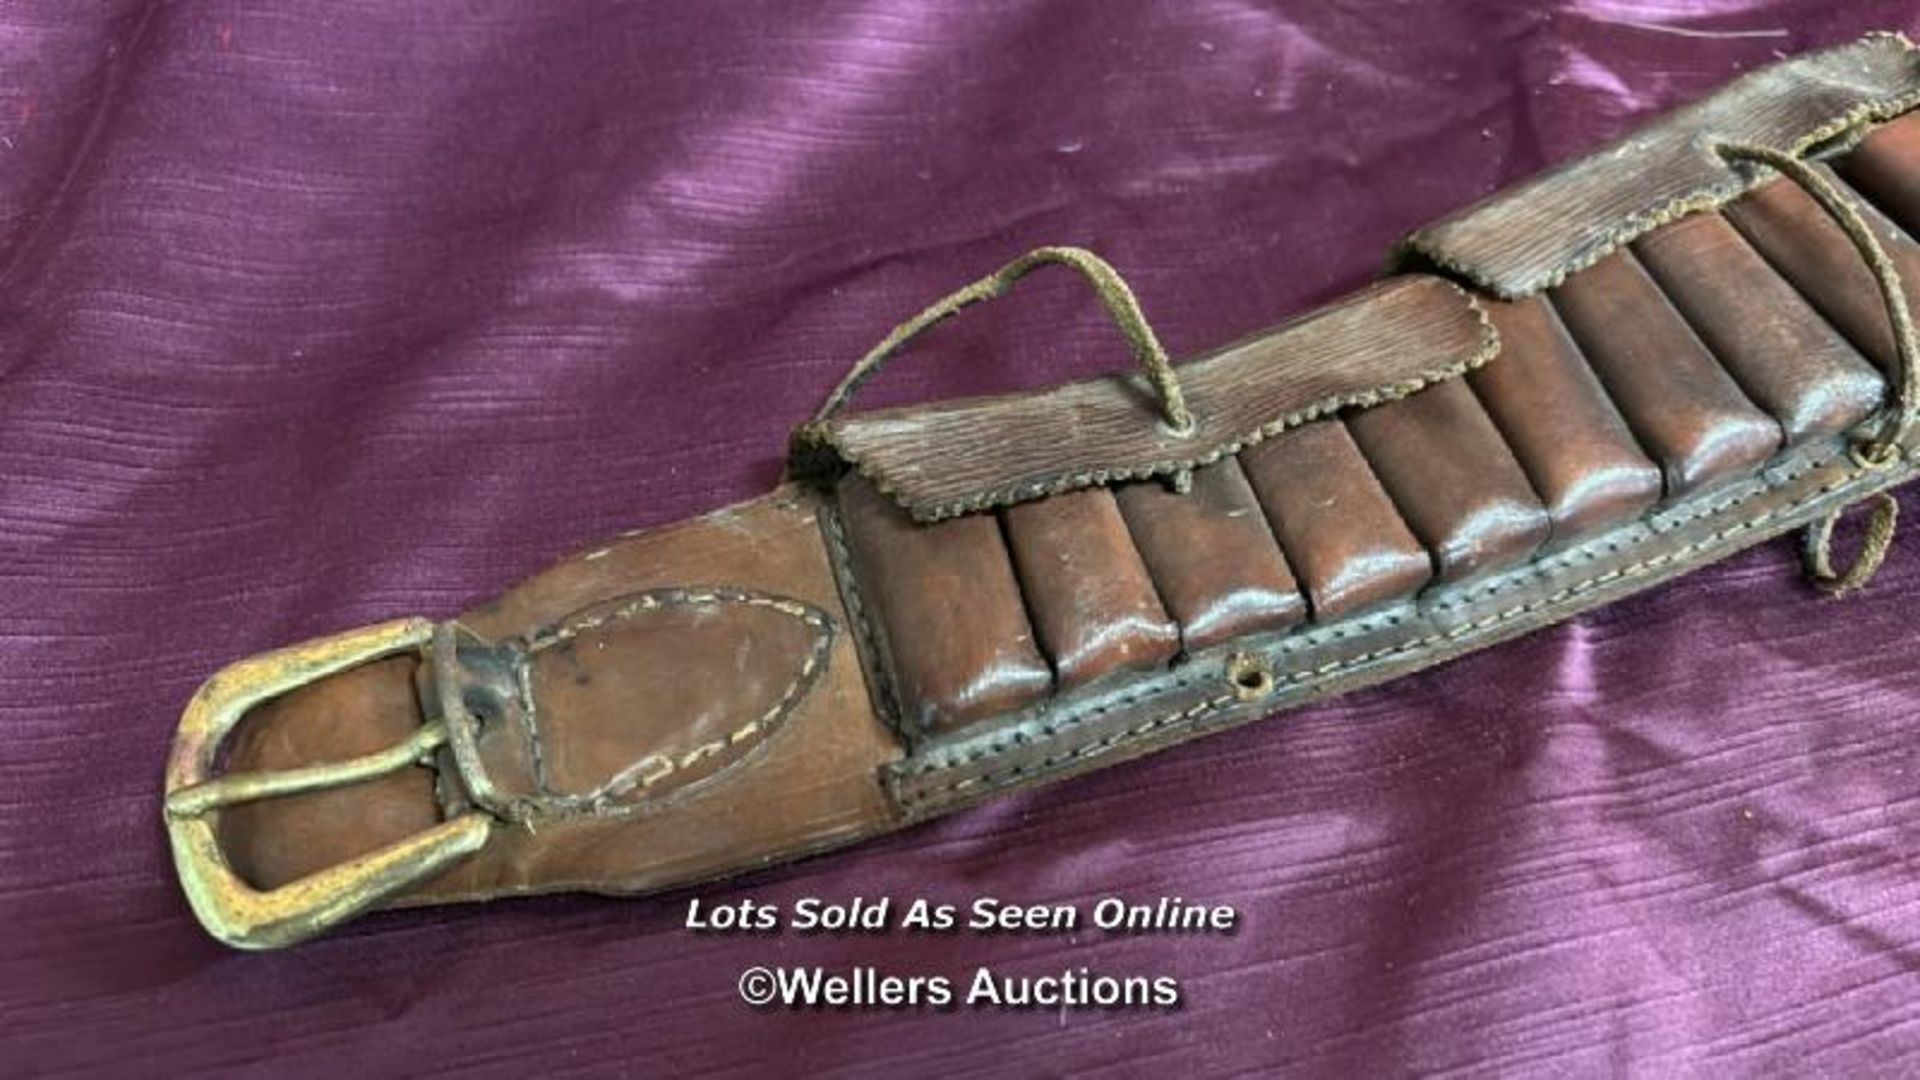 A PRIVATE PURCHASE LEATHER BANDALIER - Image 4 of 5